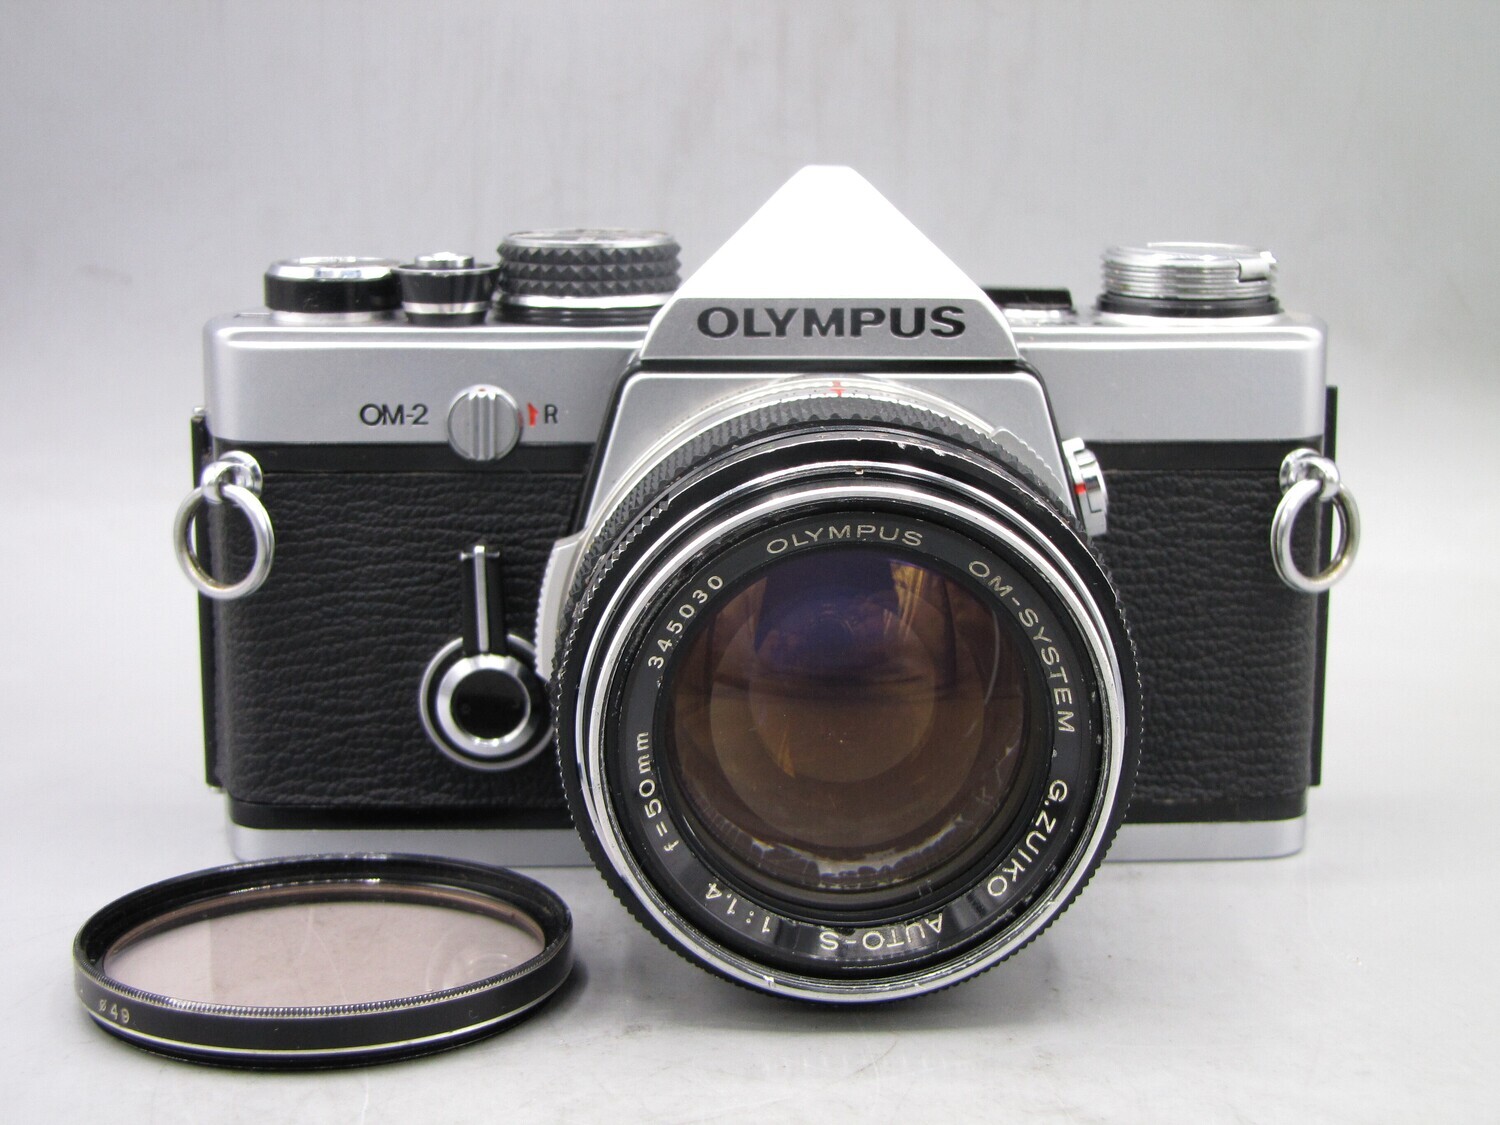 Olympus OM2 35mm SLR Camera w Lens for parts/repairs as is